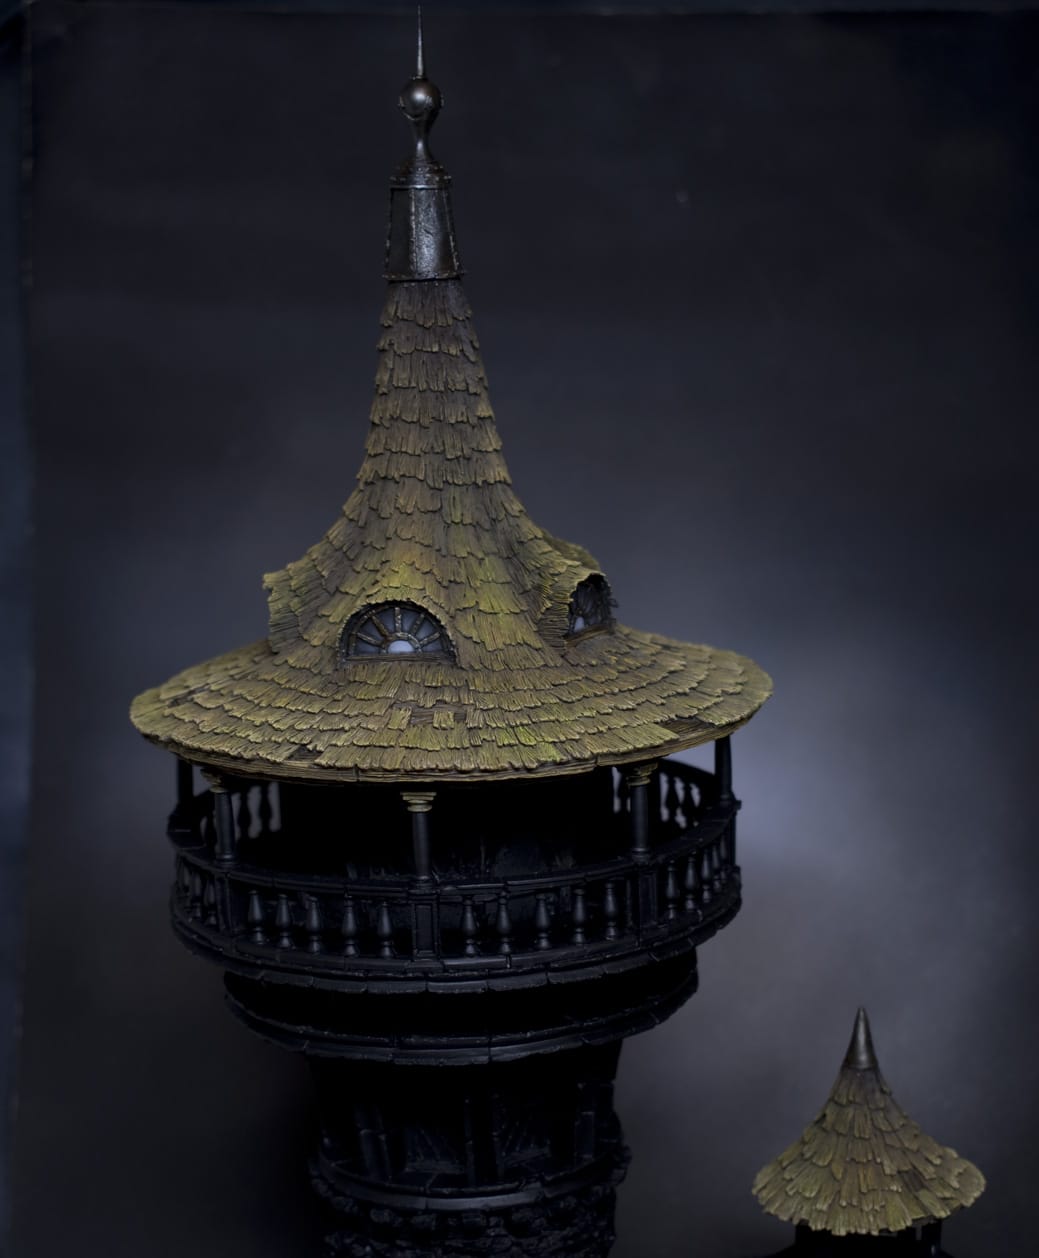 How to Paint a Wizard Tower